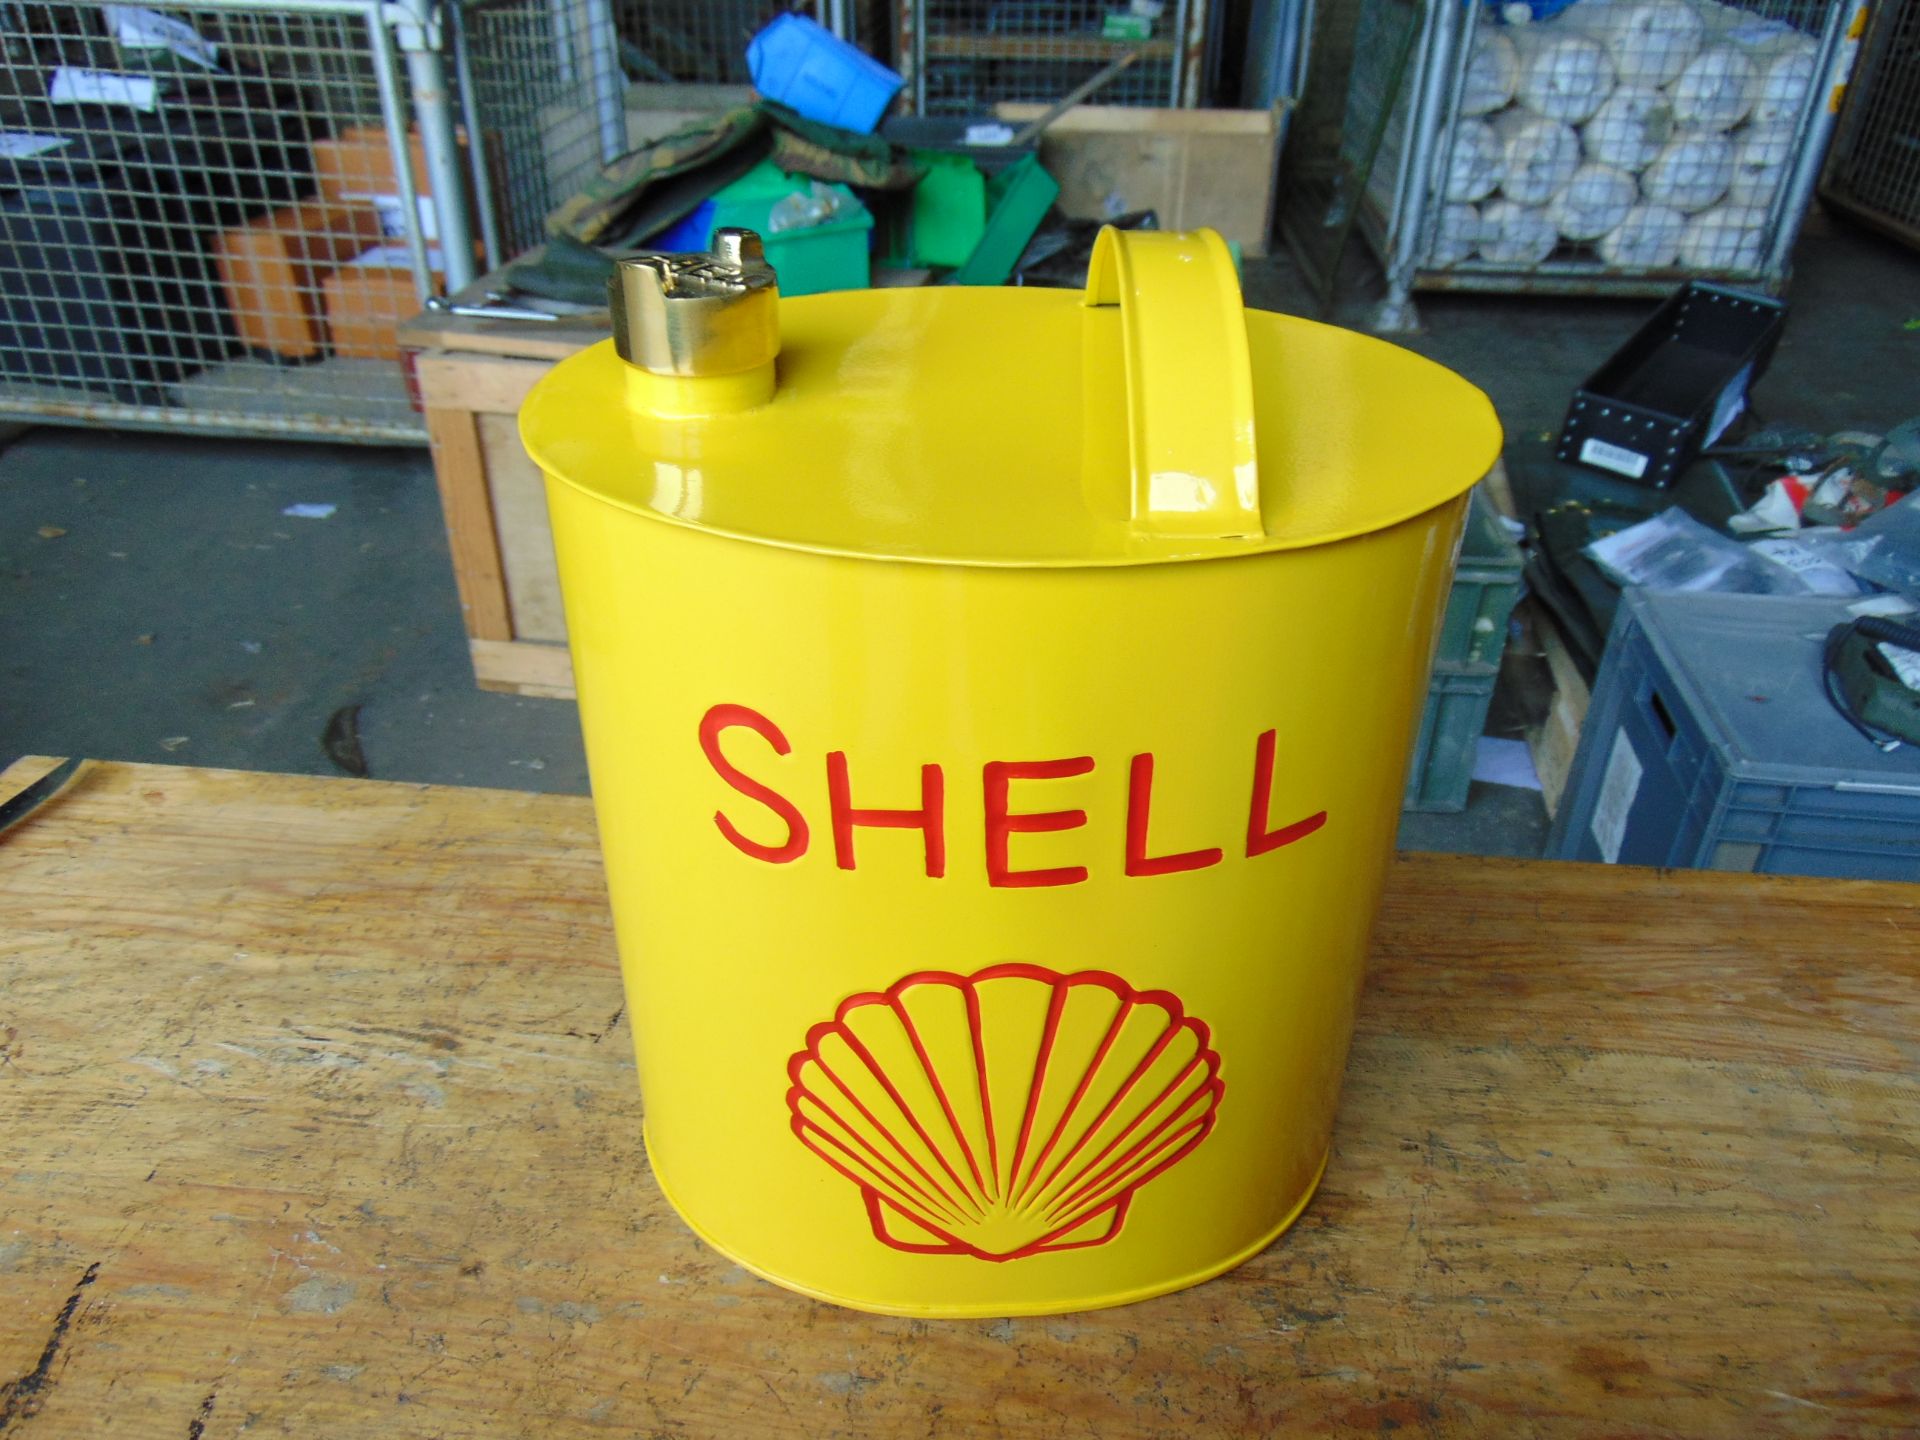 New Unused Large Shell 2 Gall Oval Fuel/Oil Can c/w Brass Cap - Image 6 of 6